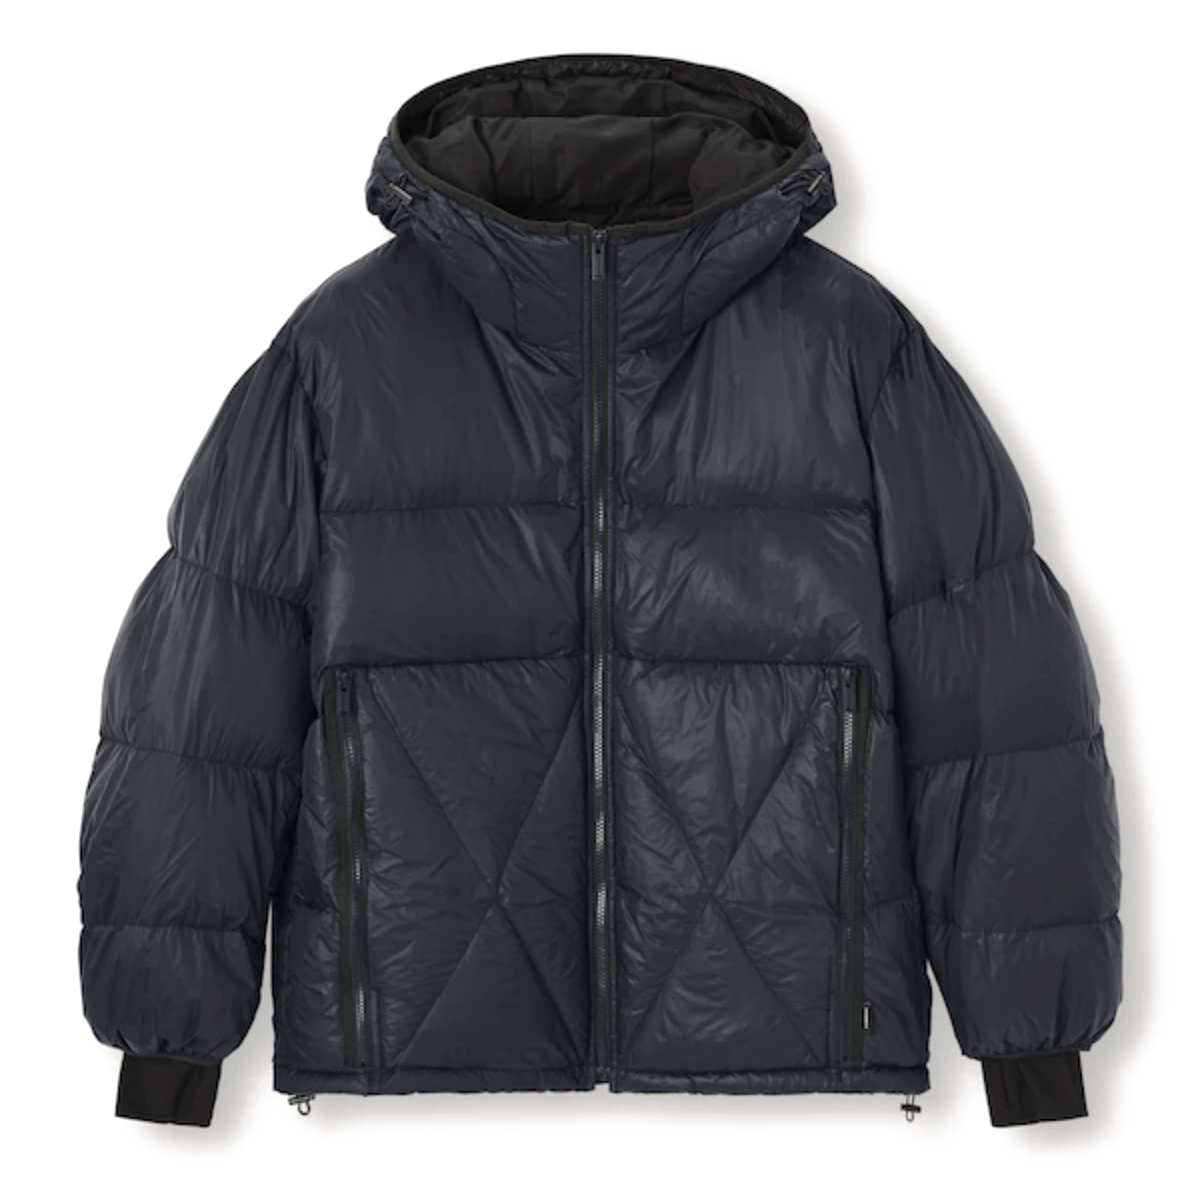 Uniqlo GU x Undercover Padded Quilted Blouson Black